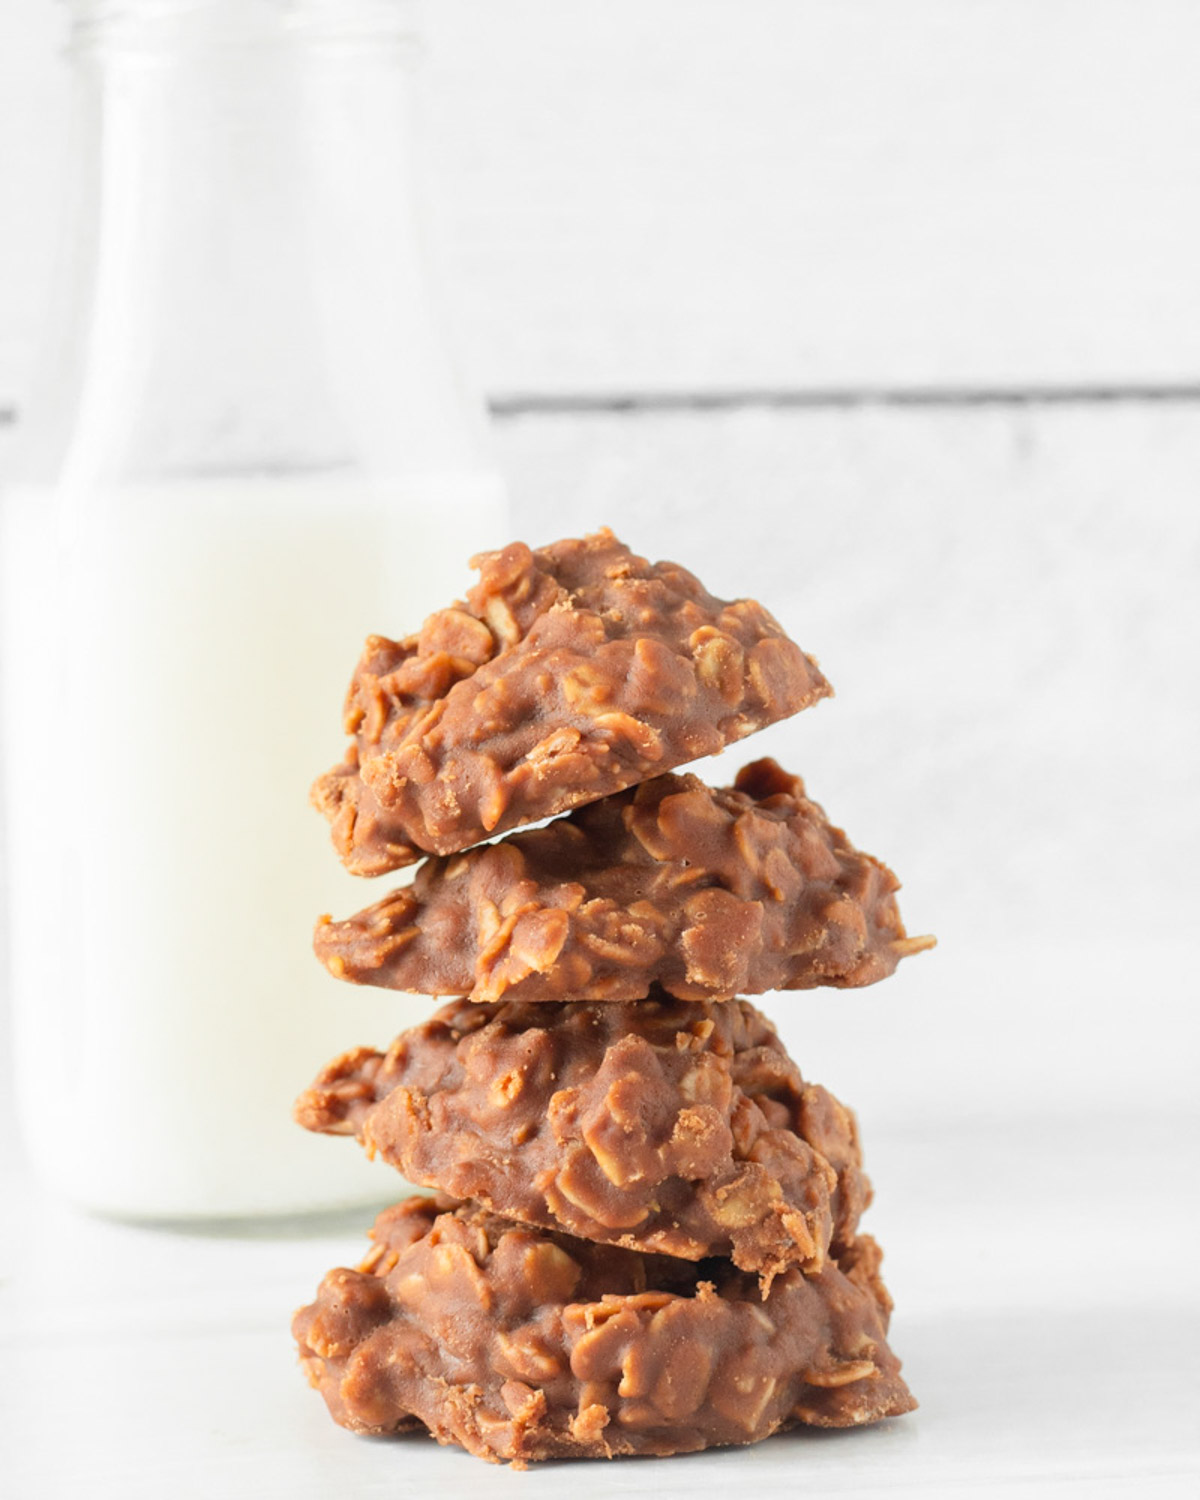 These no bake cookies are a classic dessert recipe made with 6 pantry-staple ingredients for an easy, kid-friendly treat. There is truly nothing better than a classic peanut butter and chocolate no bake cookie.